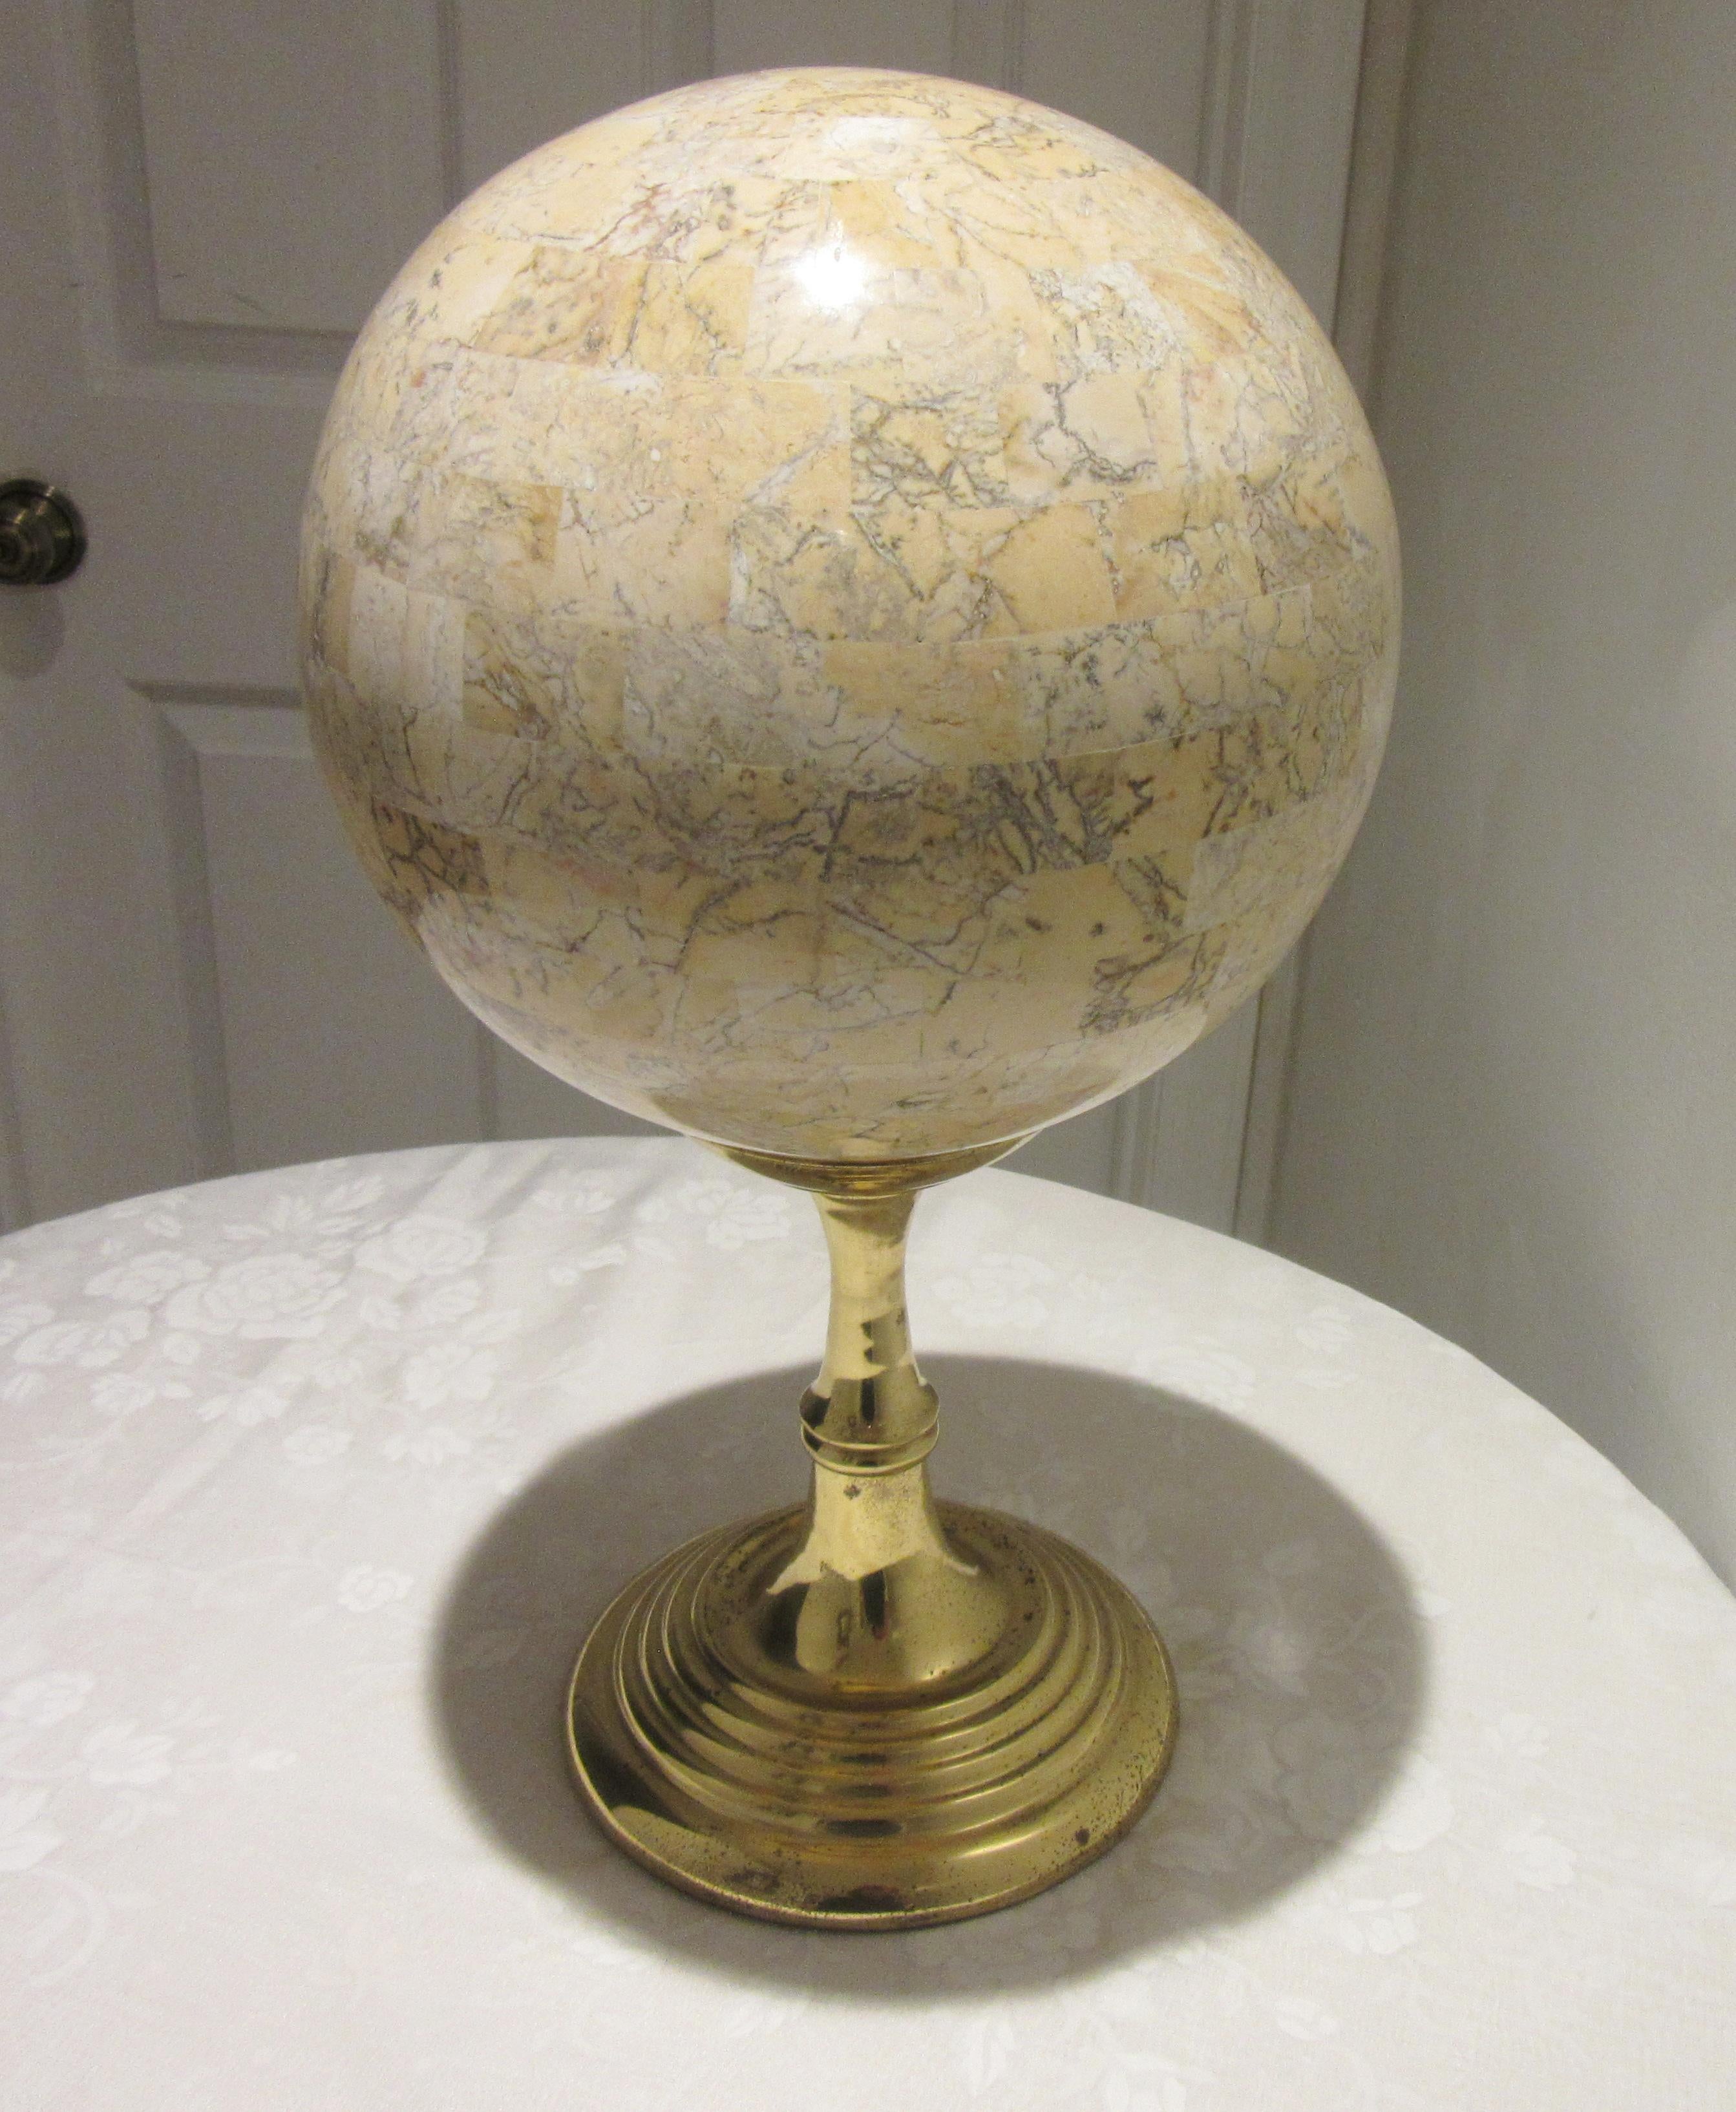 Mid-Century Modern Maitland-Smith large travertine tessellated sphere on a brass stand. The piece is marked on the bottom of the stand and the sphere. The entire piece measures 10” deep and wide, 17” high. The stand by itself measures 7.5” deep and